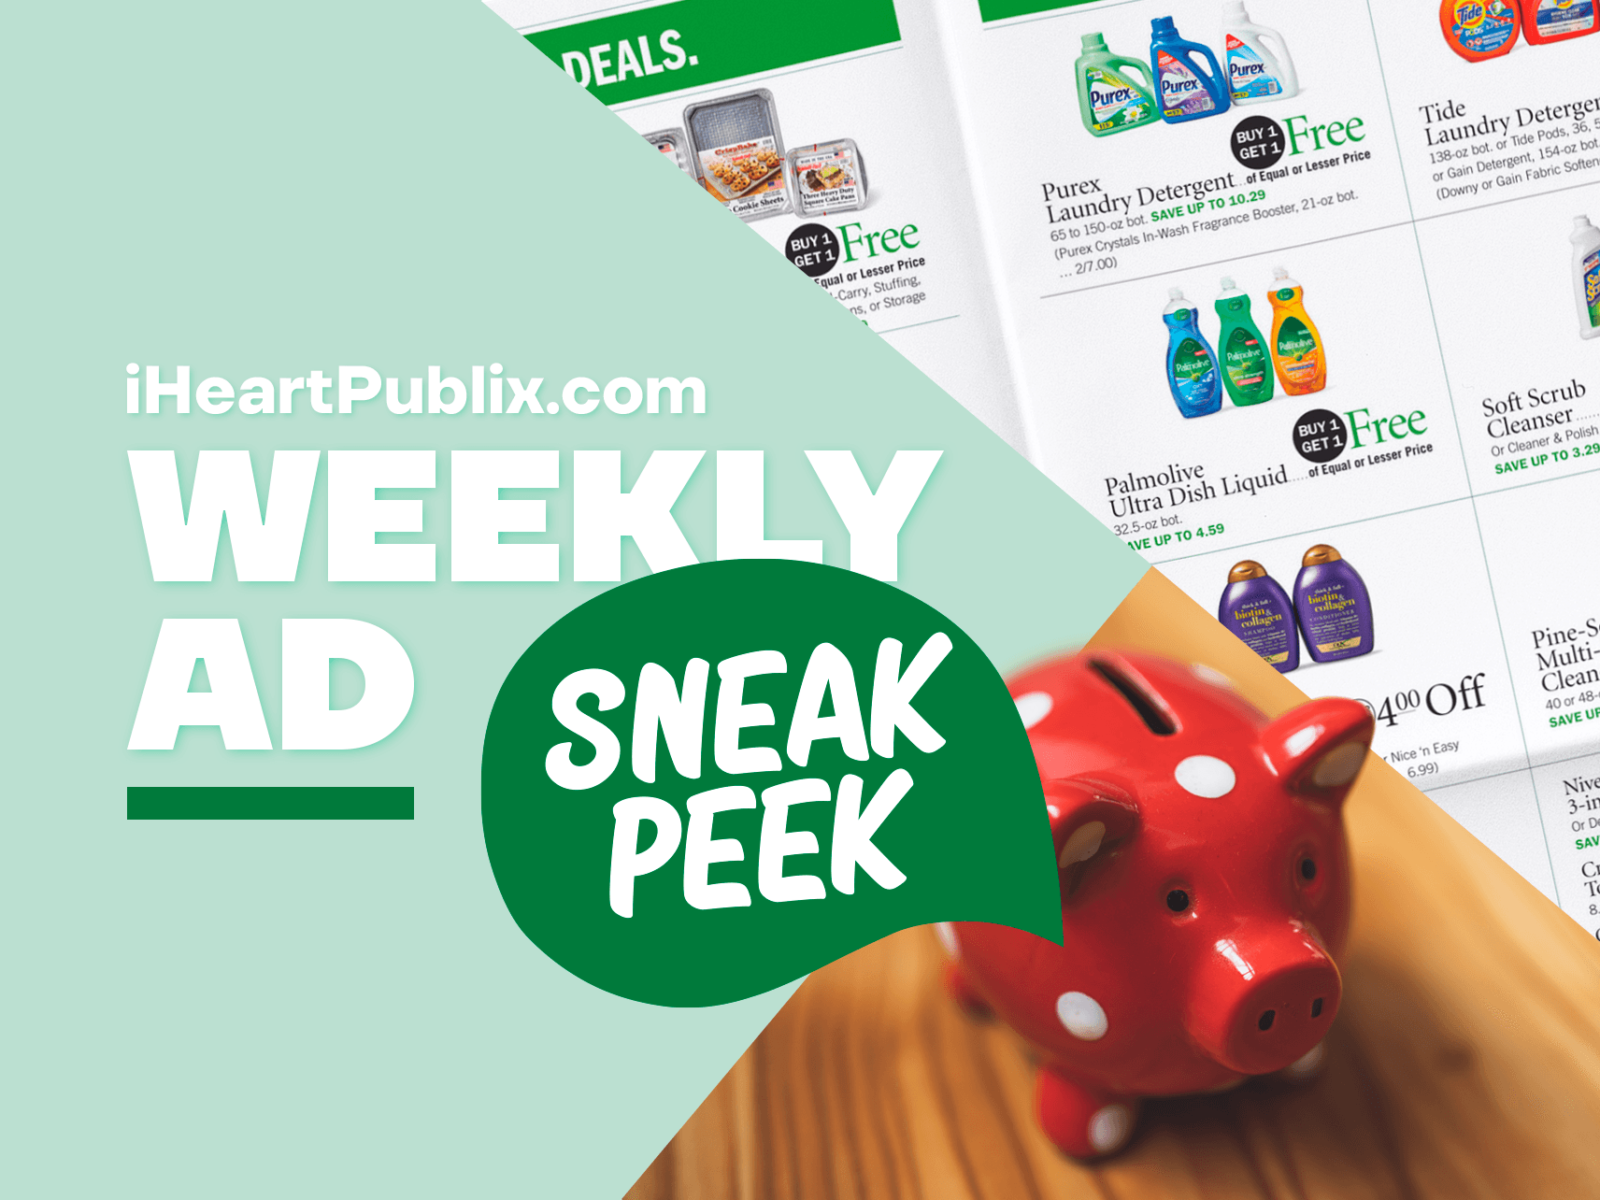 Publix Ad & Coupons Week Of 11/17 to 11/23 (11/16 to 11/23 For Some)